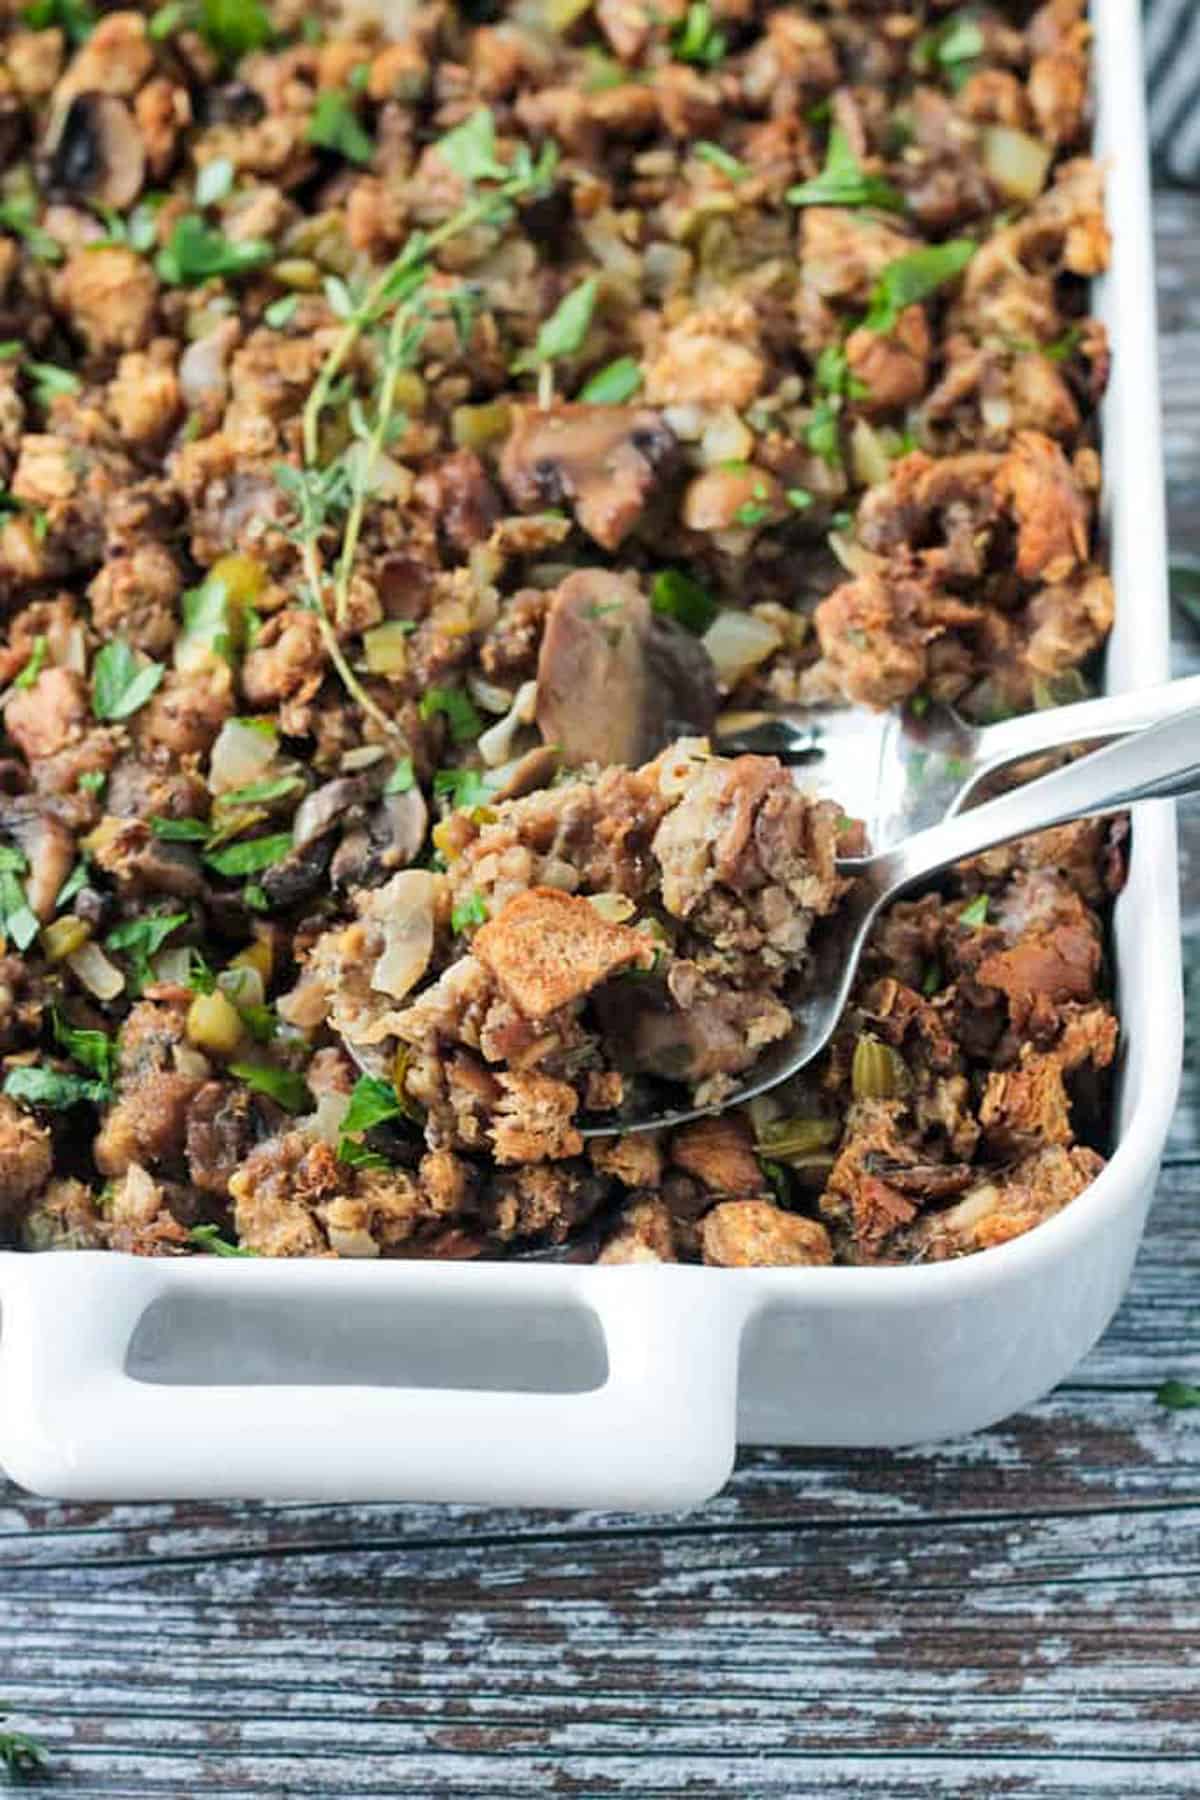 Spoonful of vegan mushroom stuffing being lifted out of the baking dish.